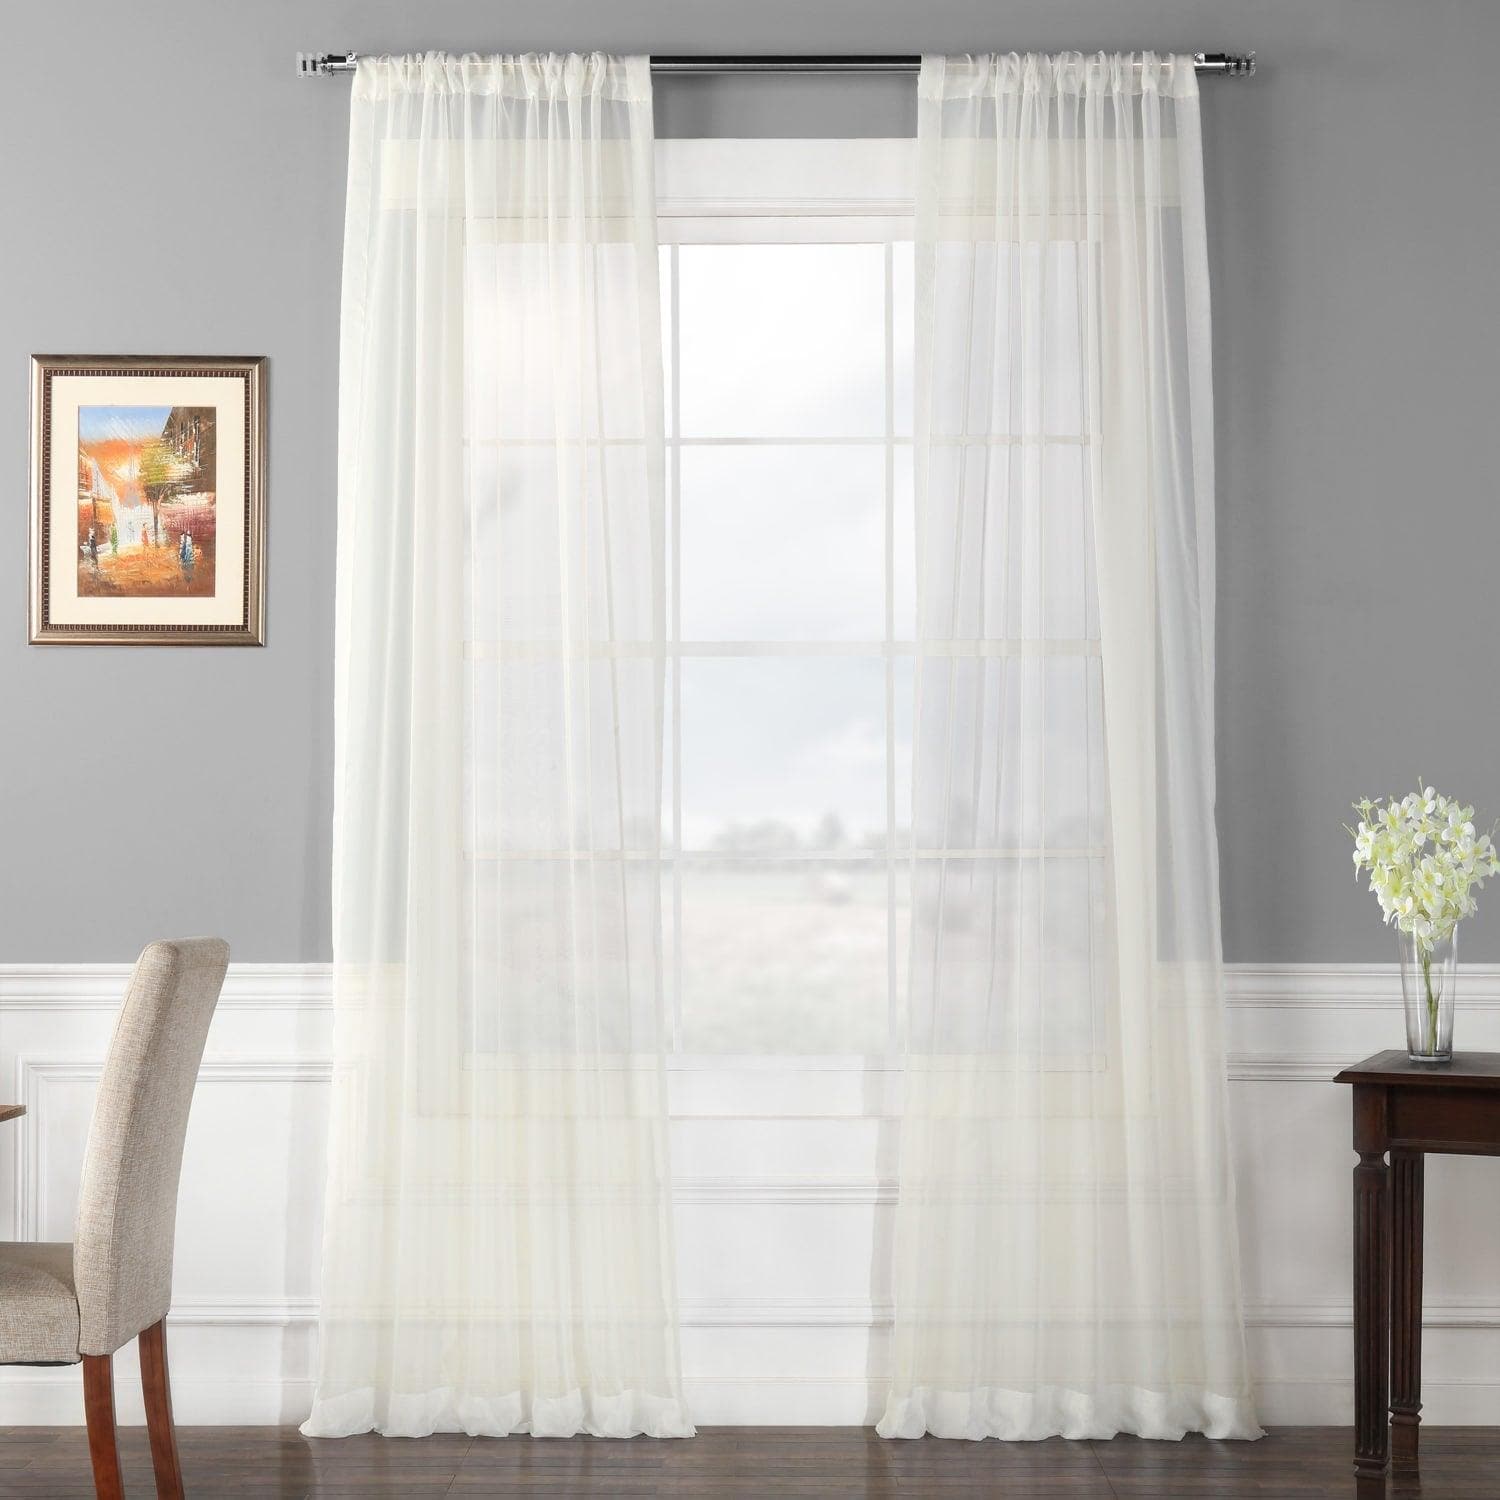 Solid Off White Voile Sheer Curtain Pair (2 Panels)